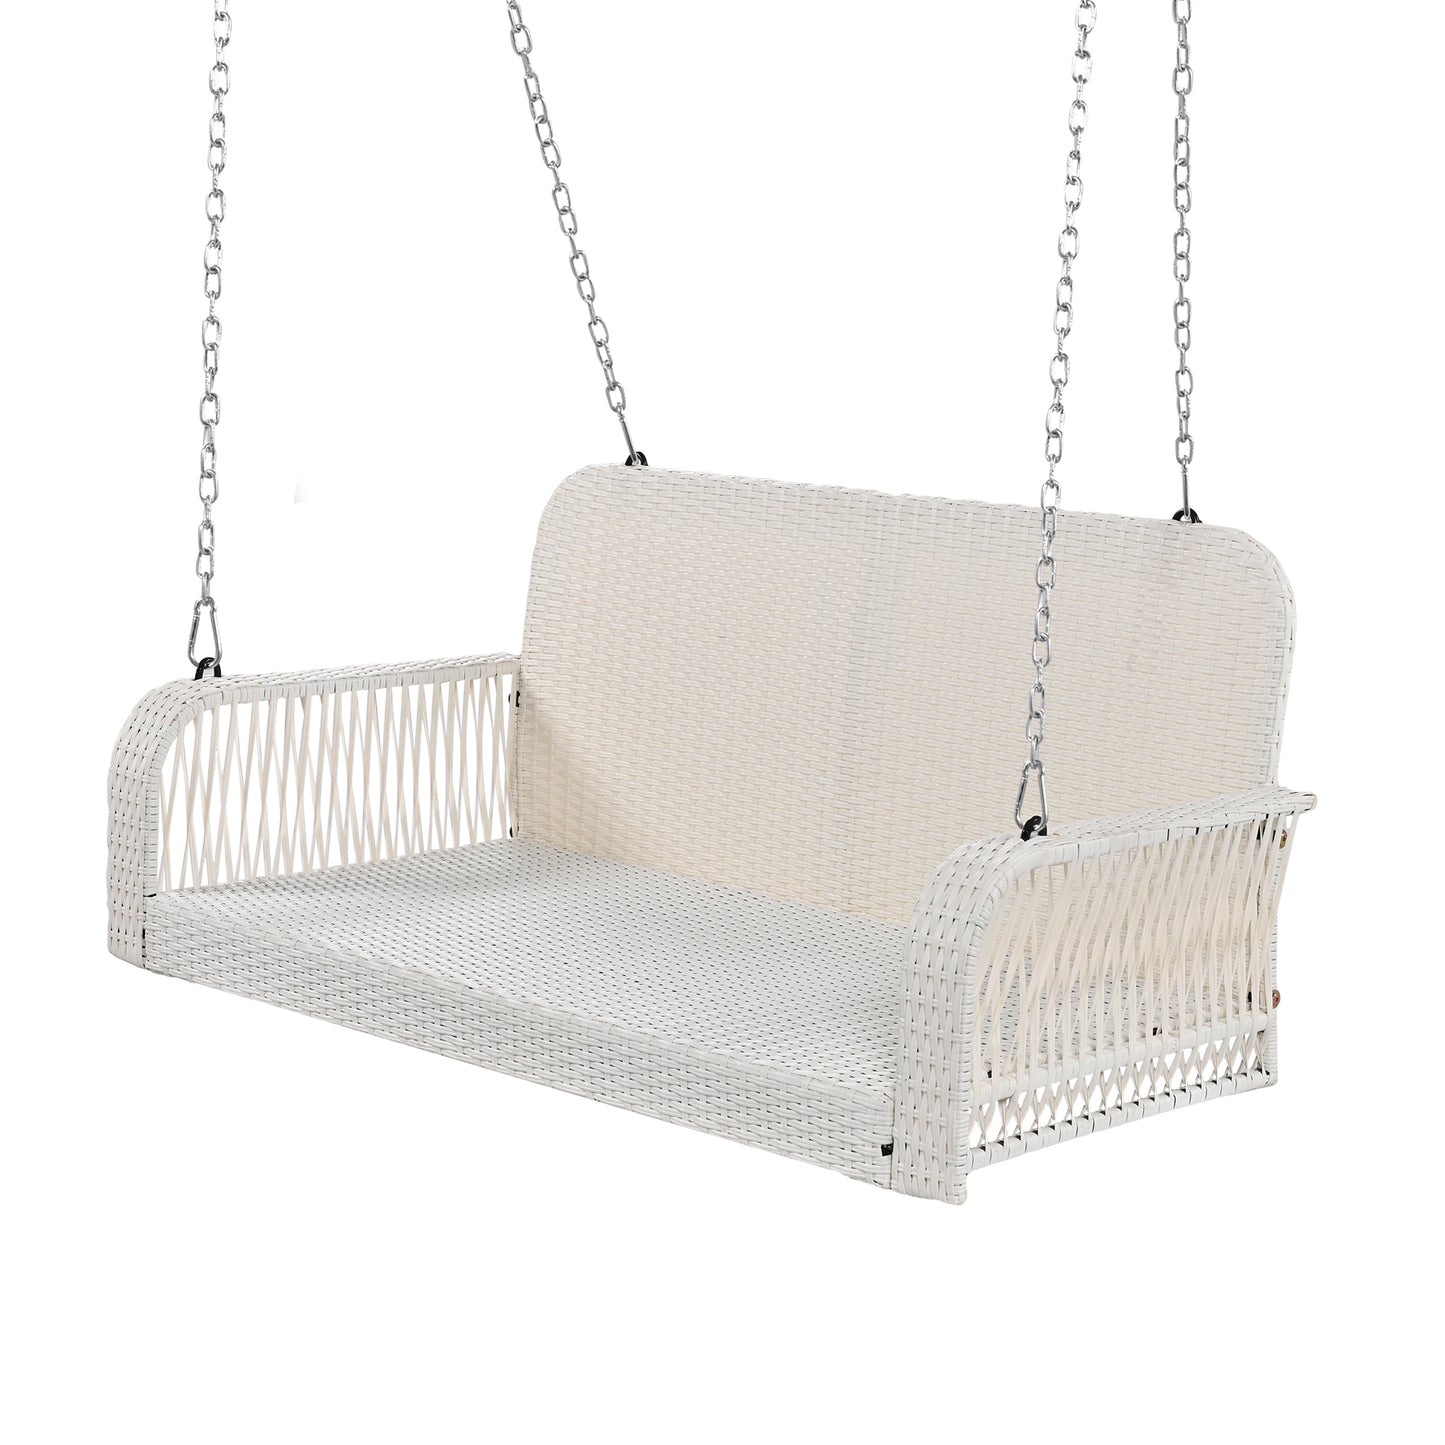 GO PE Wicker Porch Swing, 2-Seater Hanging Bench With Chains, Patio Furniture Swing For Backyard Garden Poolside, White And Gray